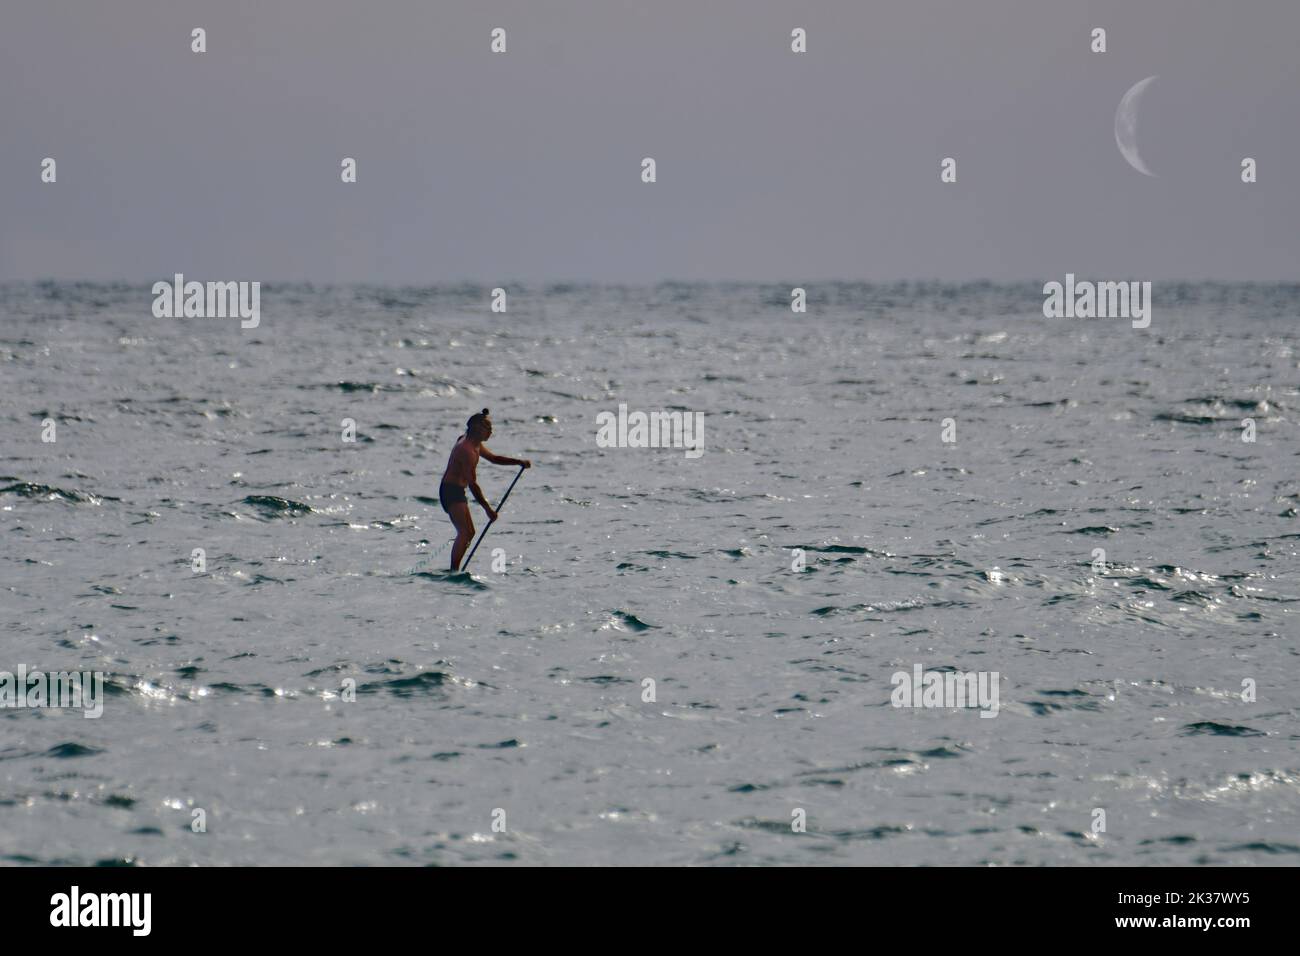 A man practices paddle surfing on a hot day with the Moon as a witness. Stock Photo